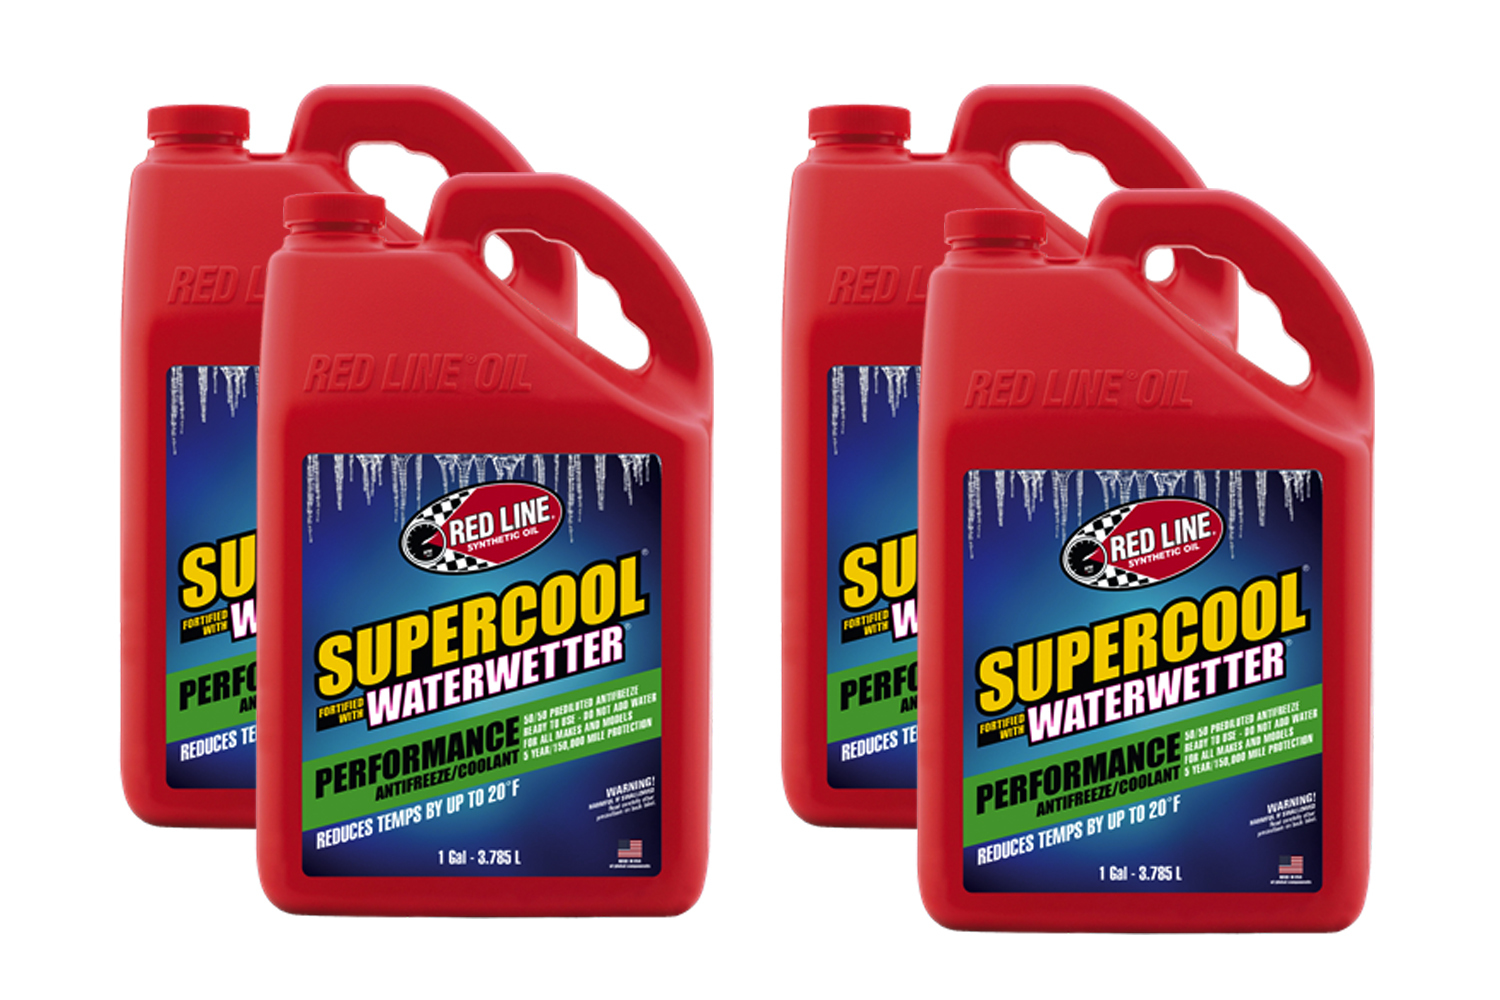 REDLINE OIL Antifreeze / Coolant Additive Supercool WaterWetter Pre-Mixed 1 Gal